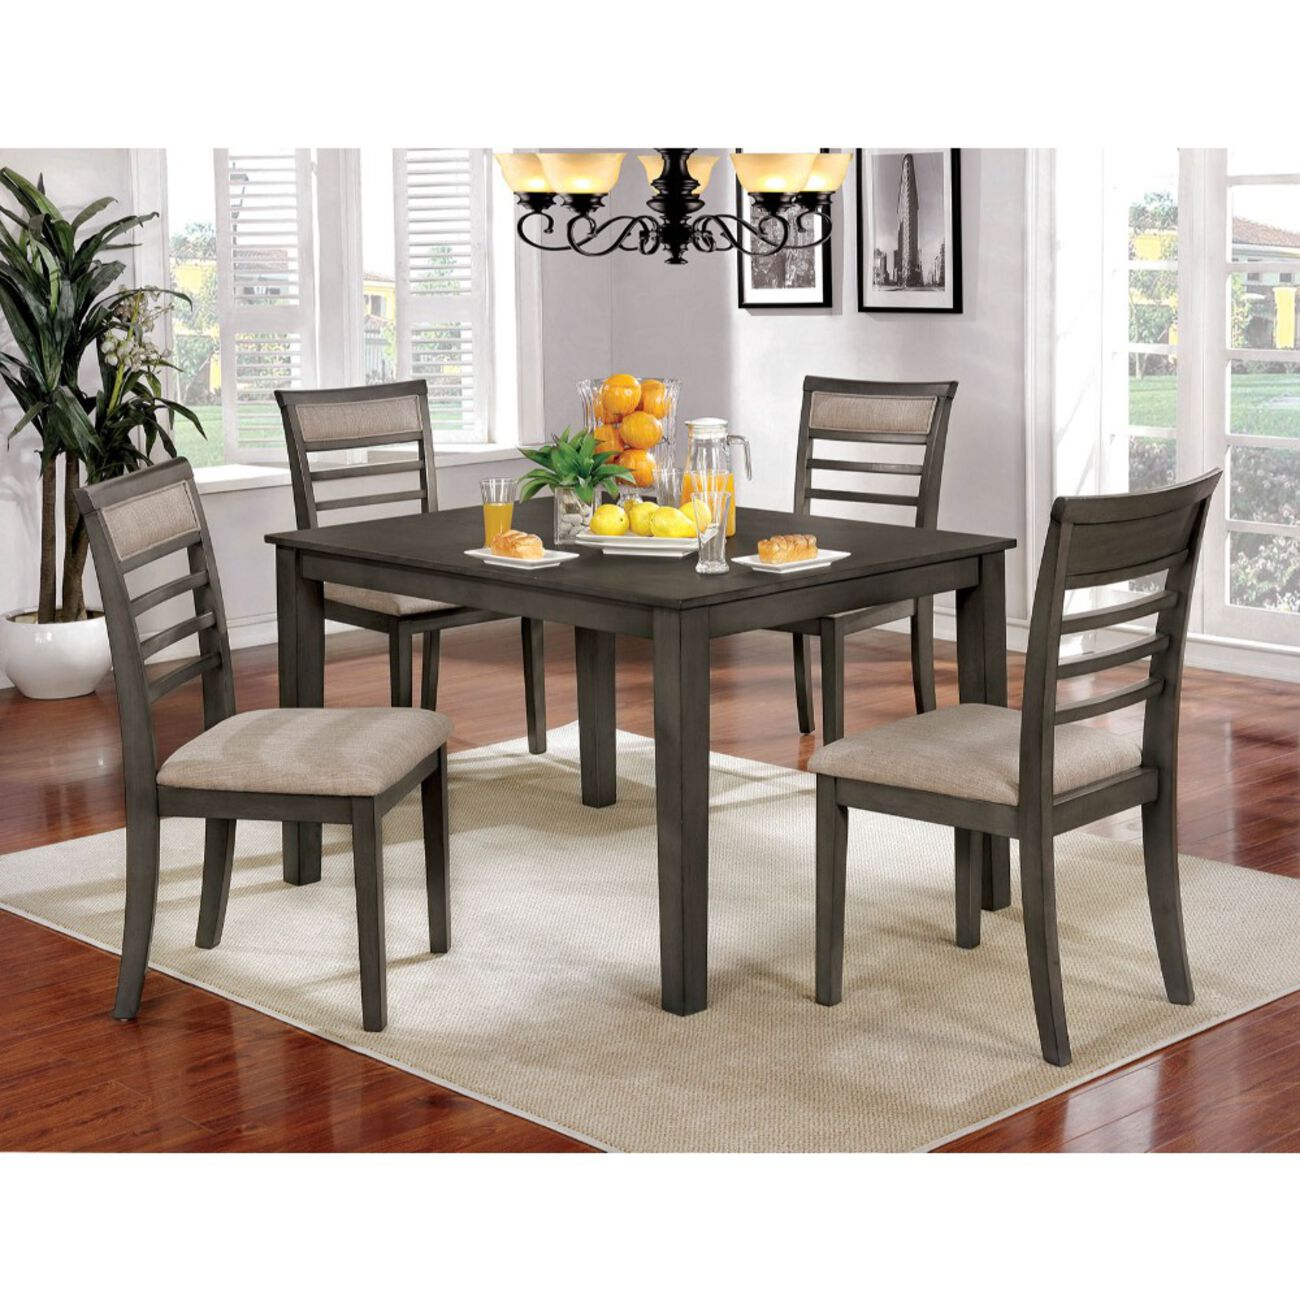 5-Piece Wooden Dining Table Set In Weathered Brown